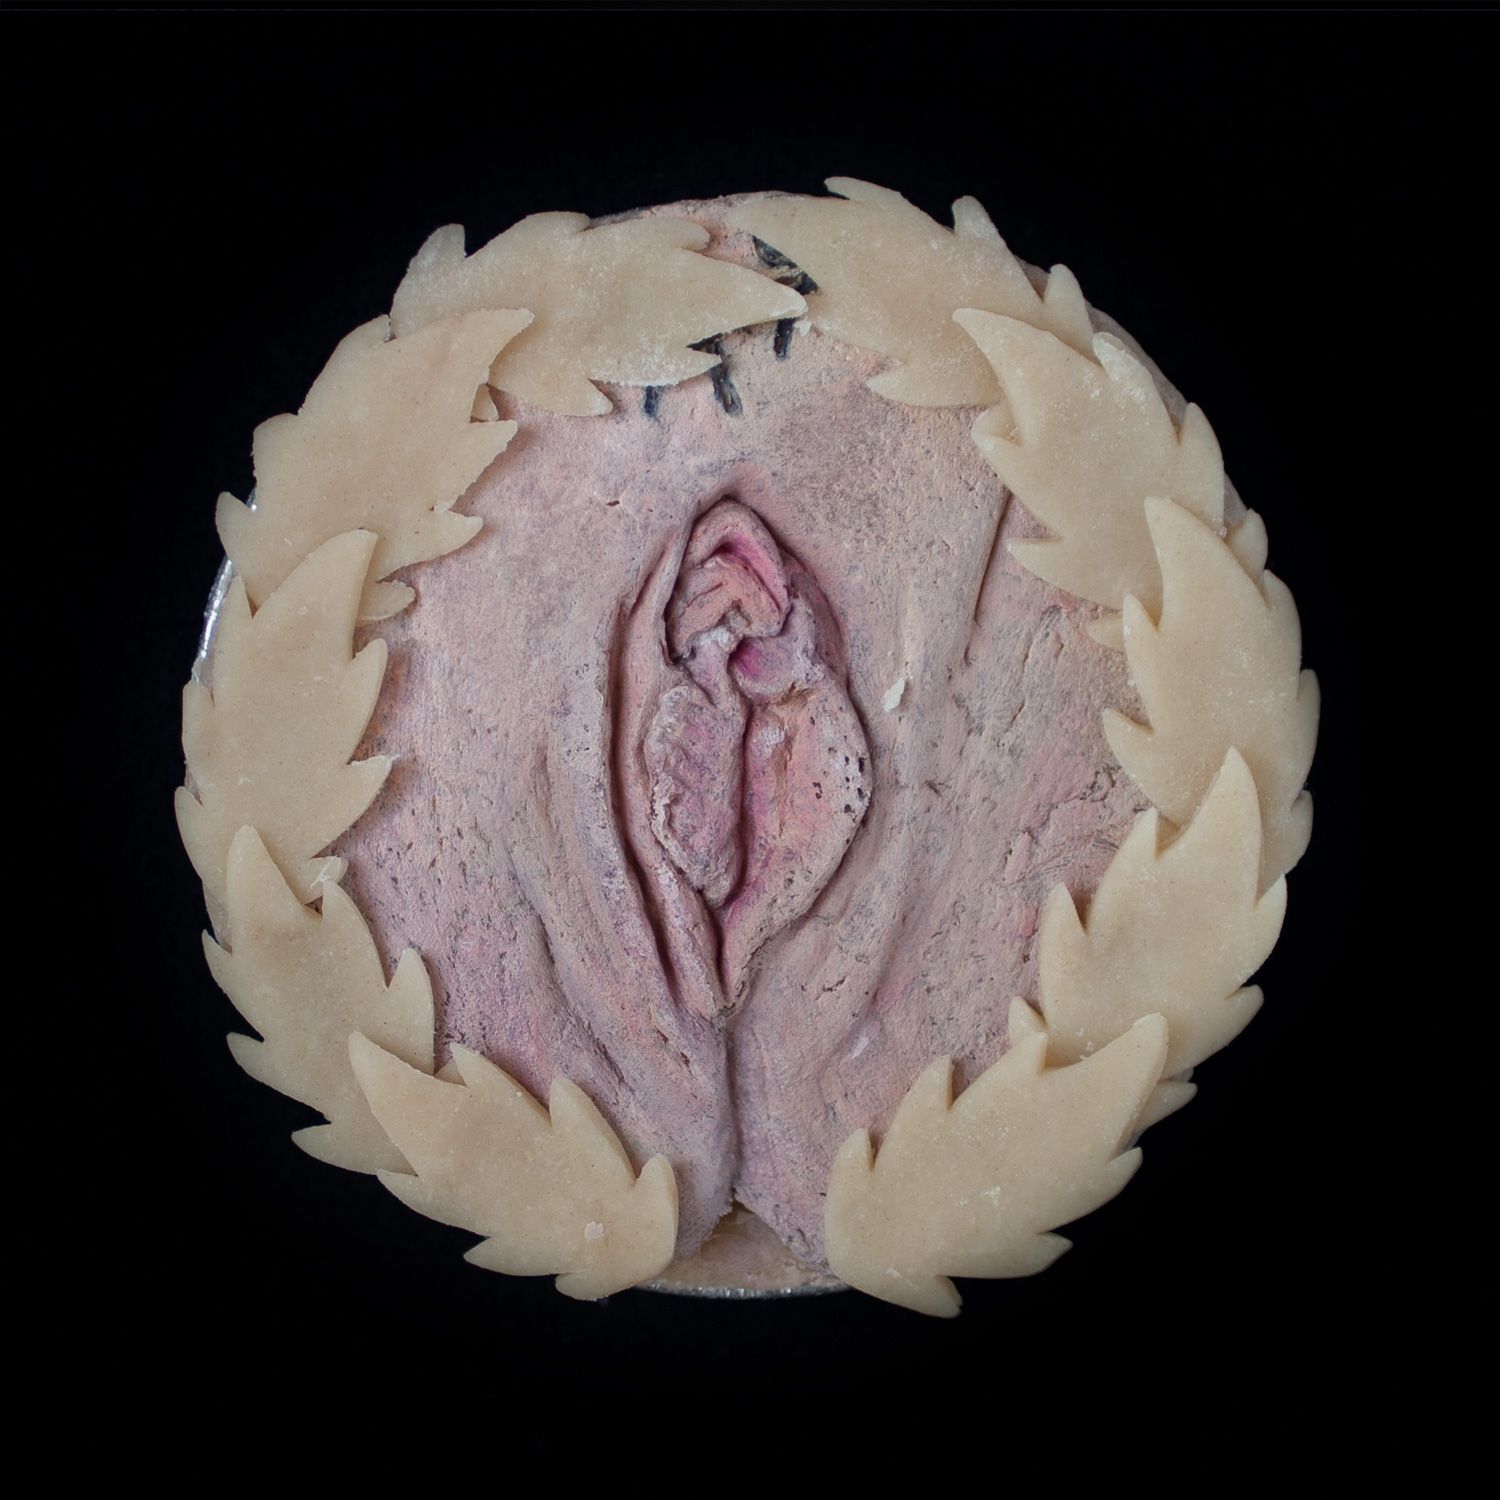 A vulva pie on a black background. The pie is surrounded with pie crust leaves and is painted to look like a realistic vulva. 